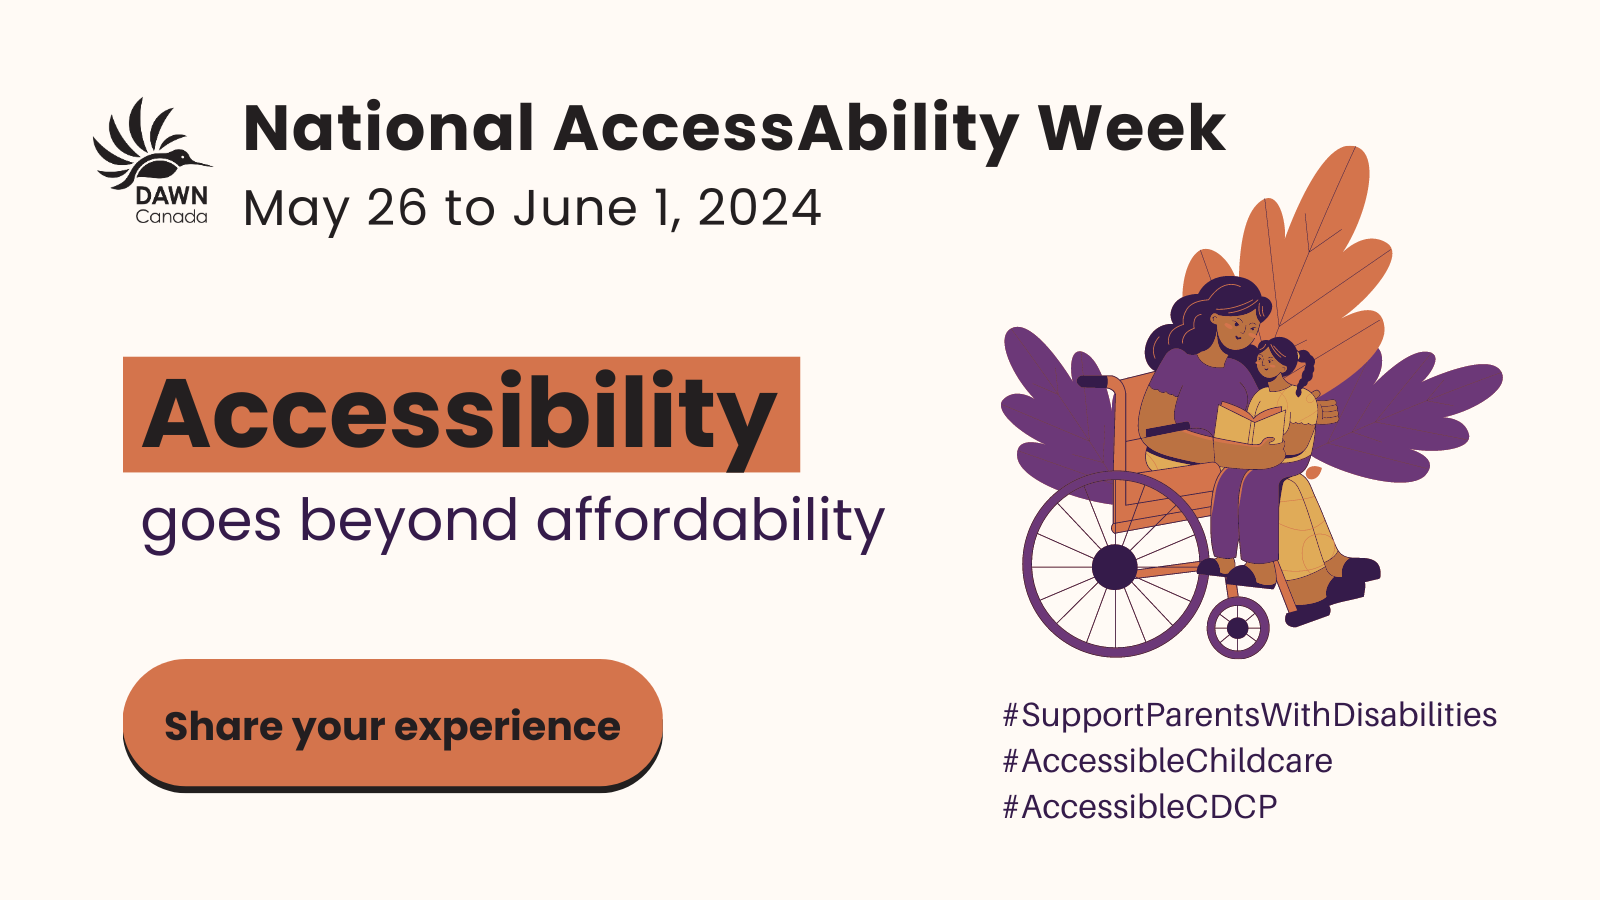 Text-based banner for National Accessibility Week with the slogan "Accessibility goes beyond affordability"